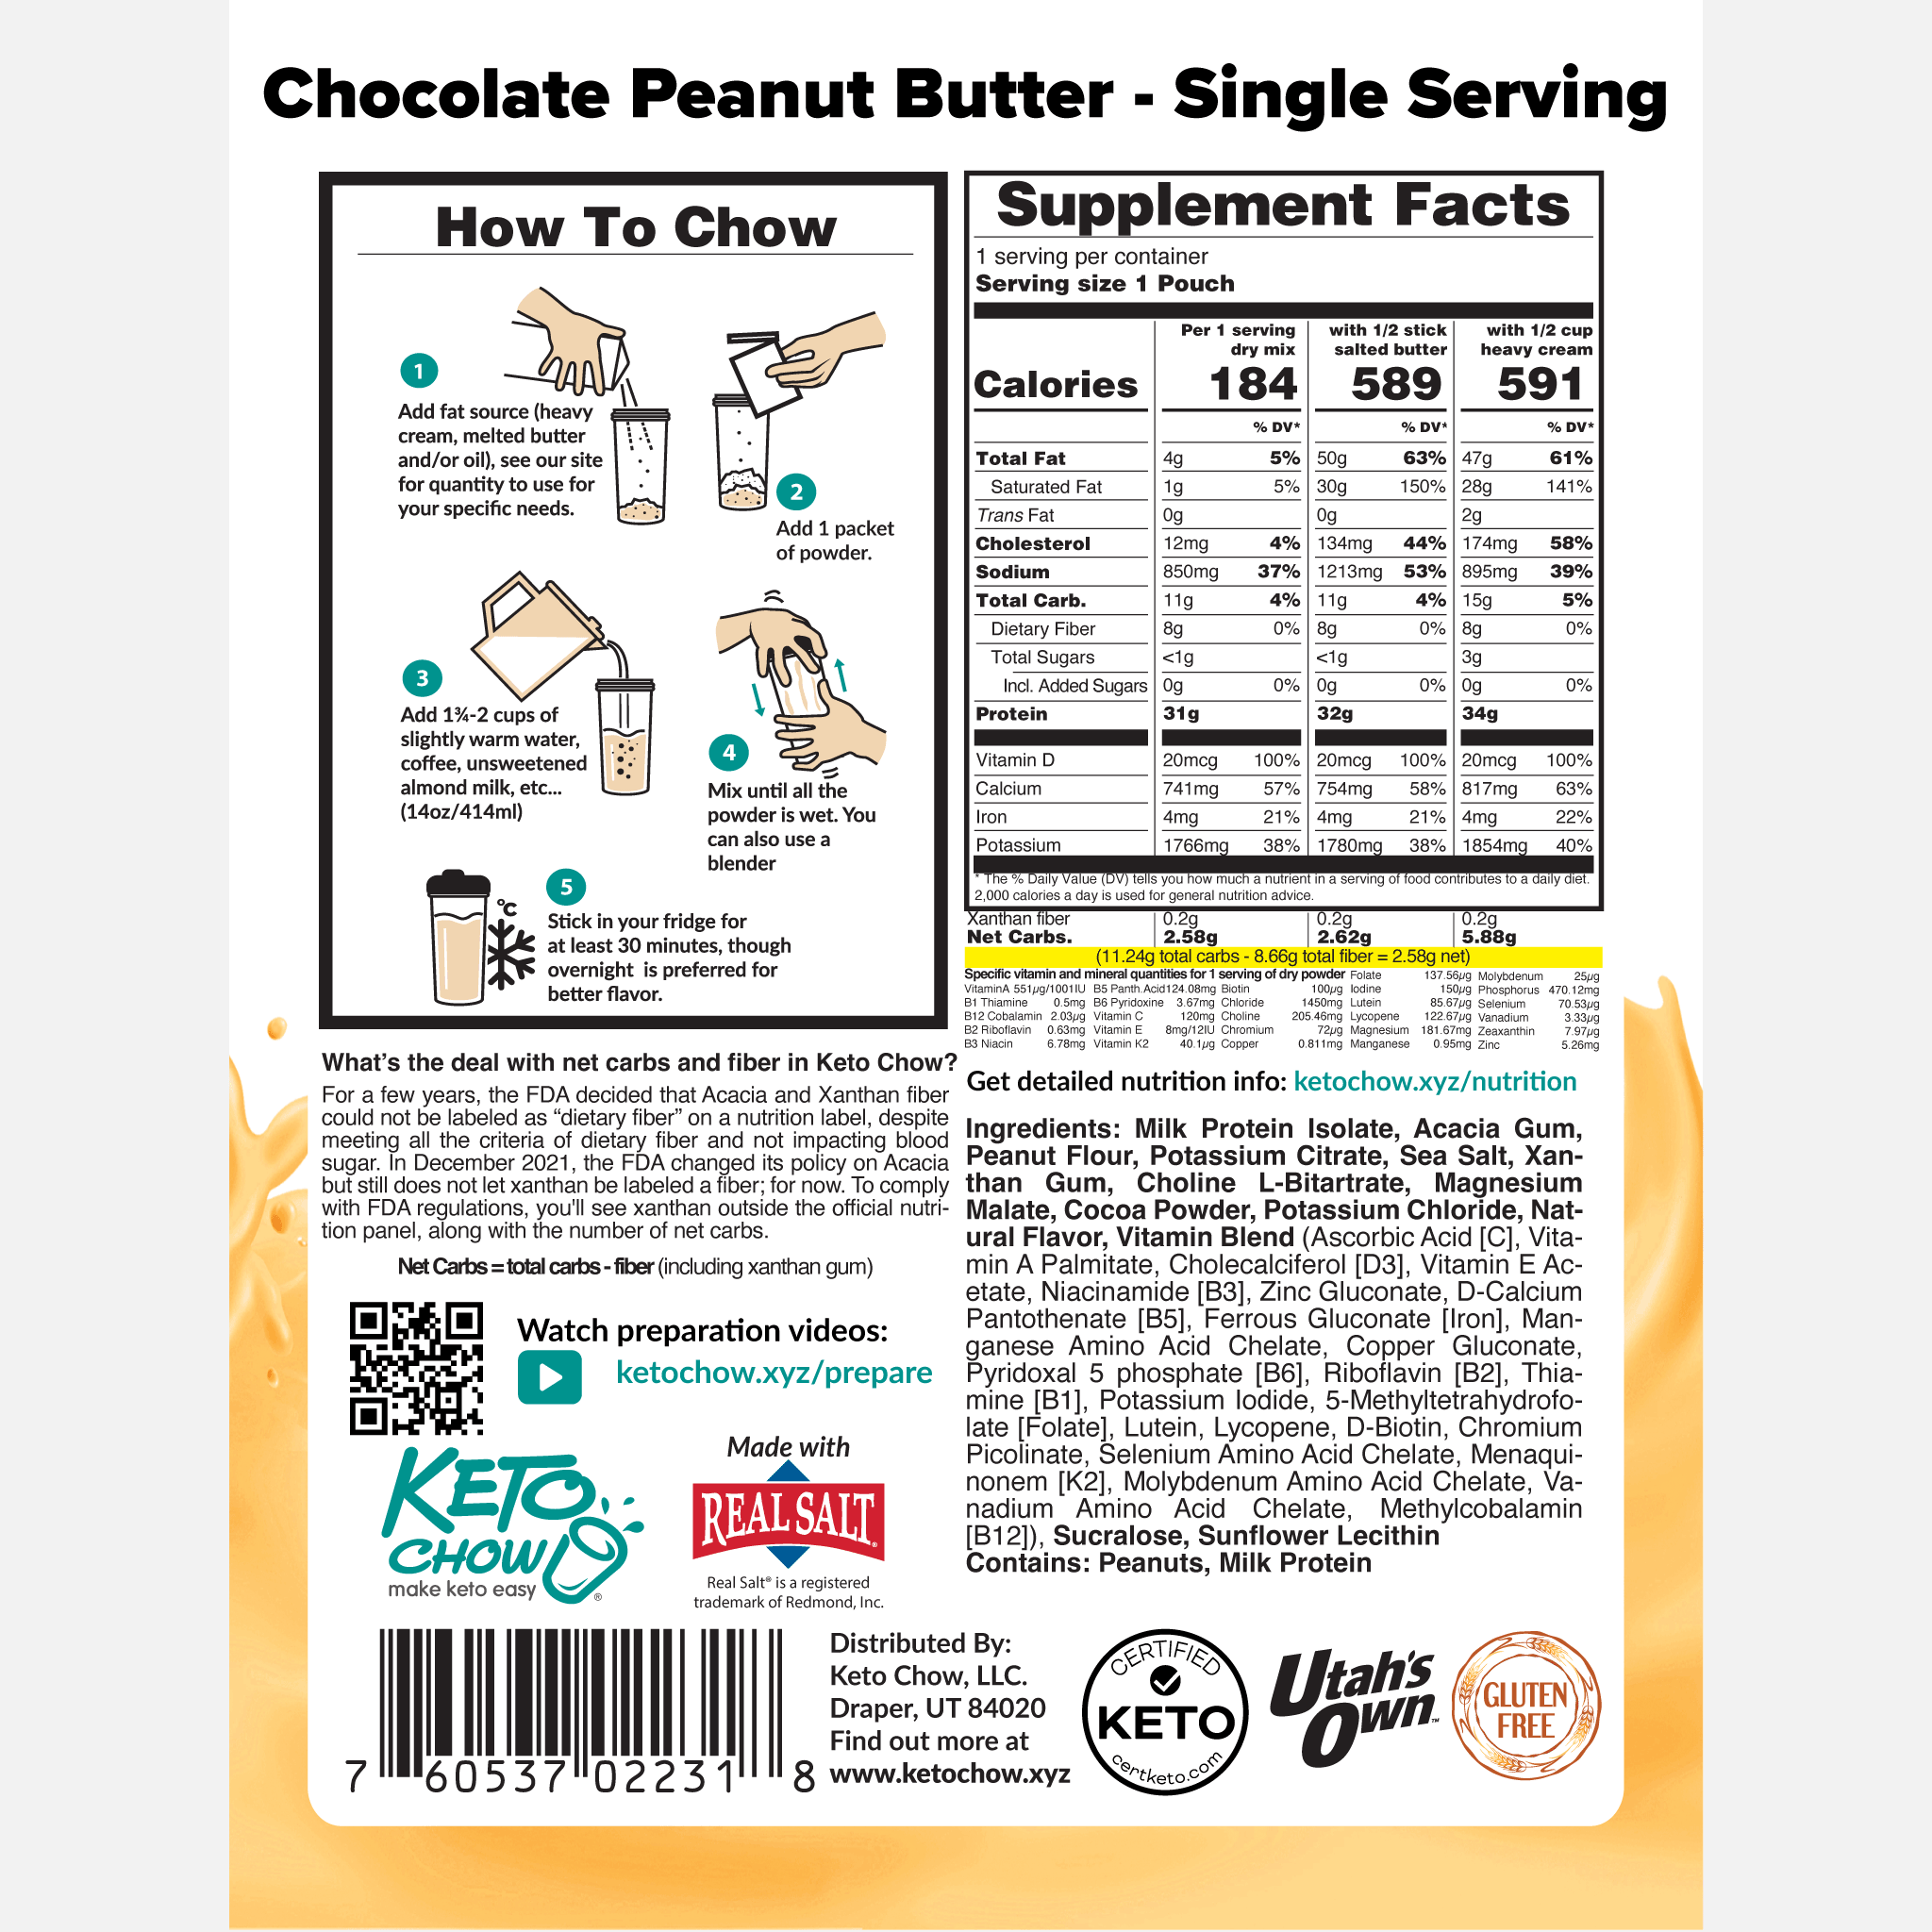 Chocolate Peanut Butter Keto Chow package back